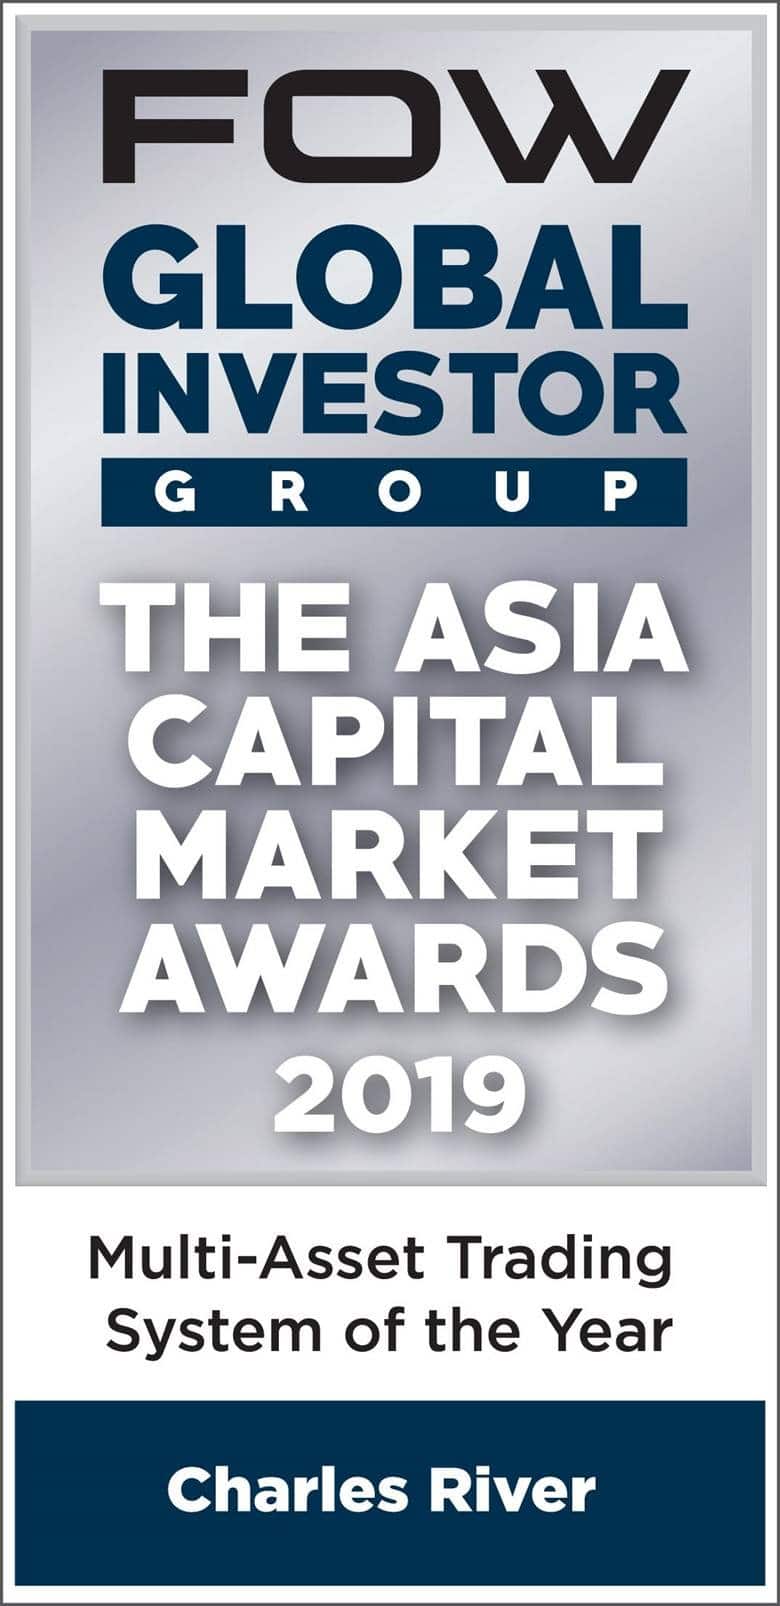 FOW and Global Investor Asia Awards 2019